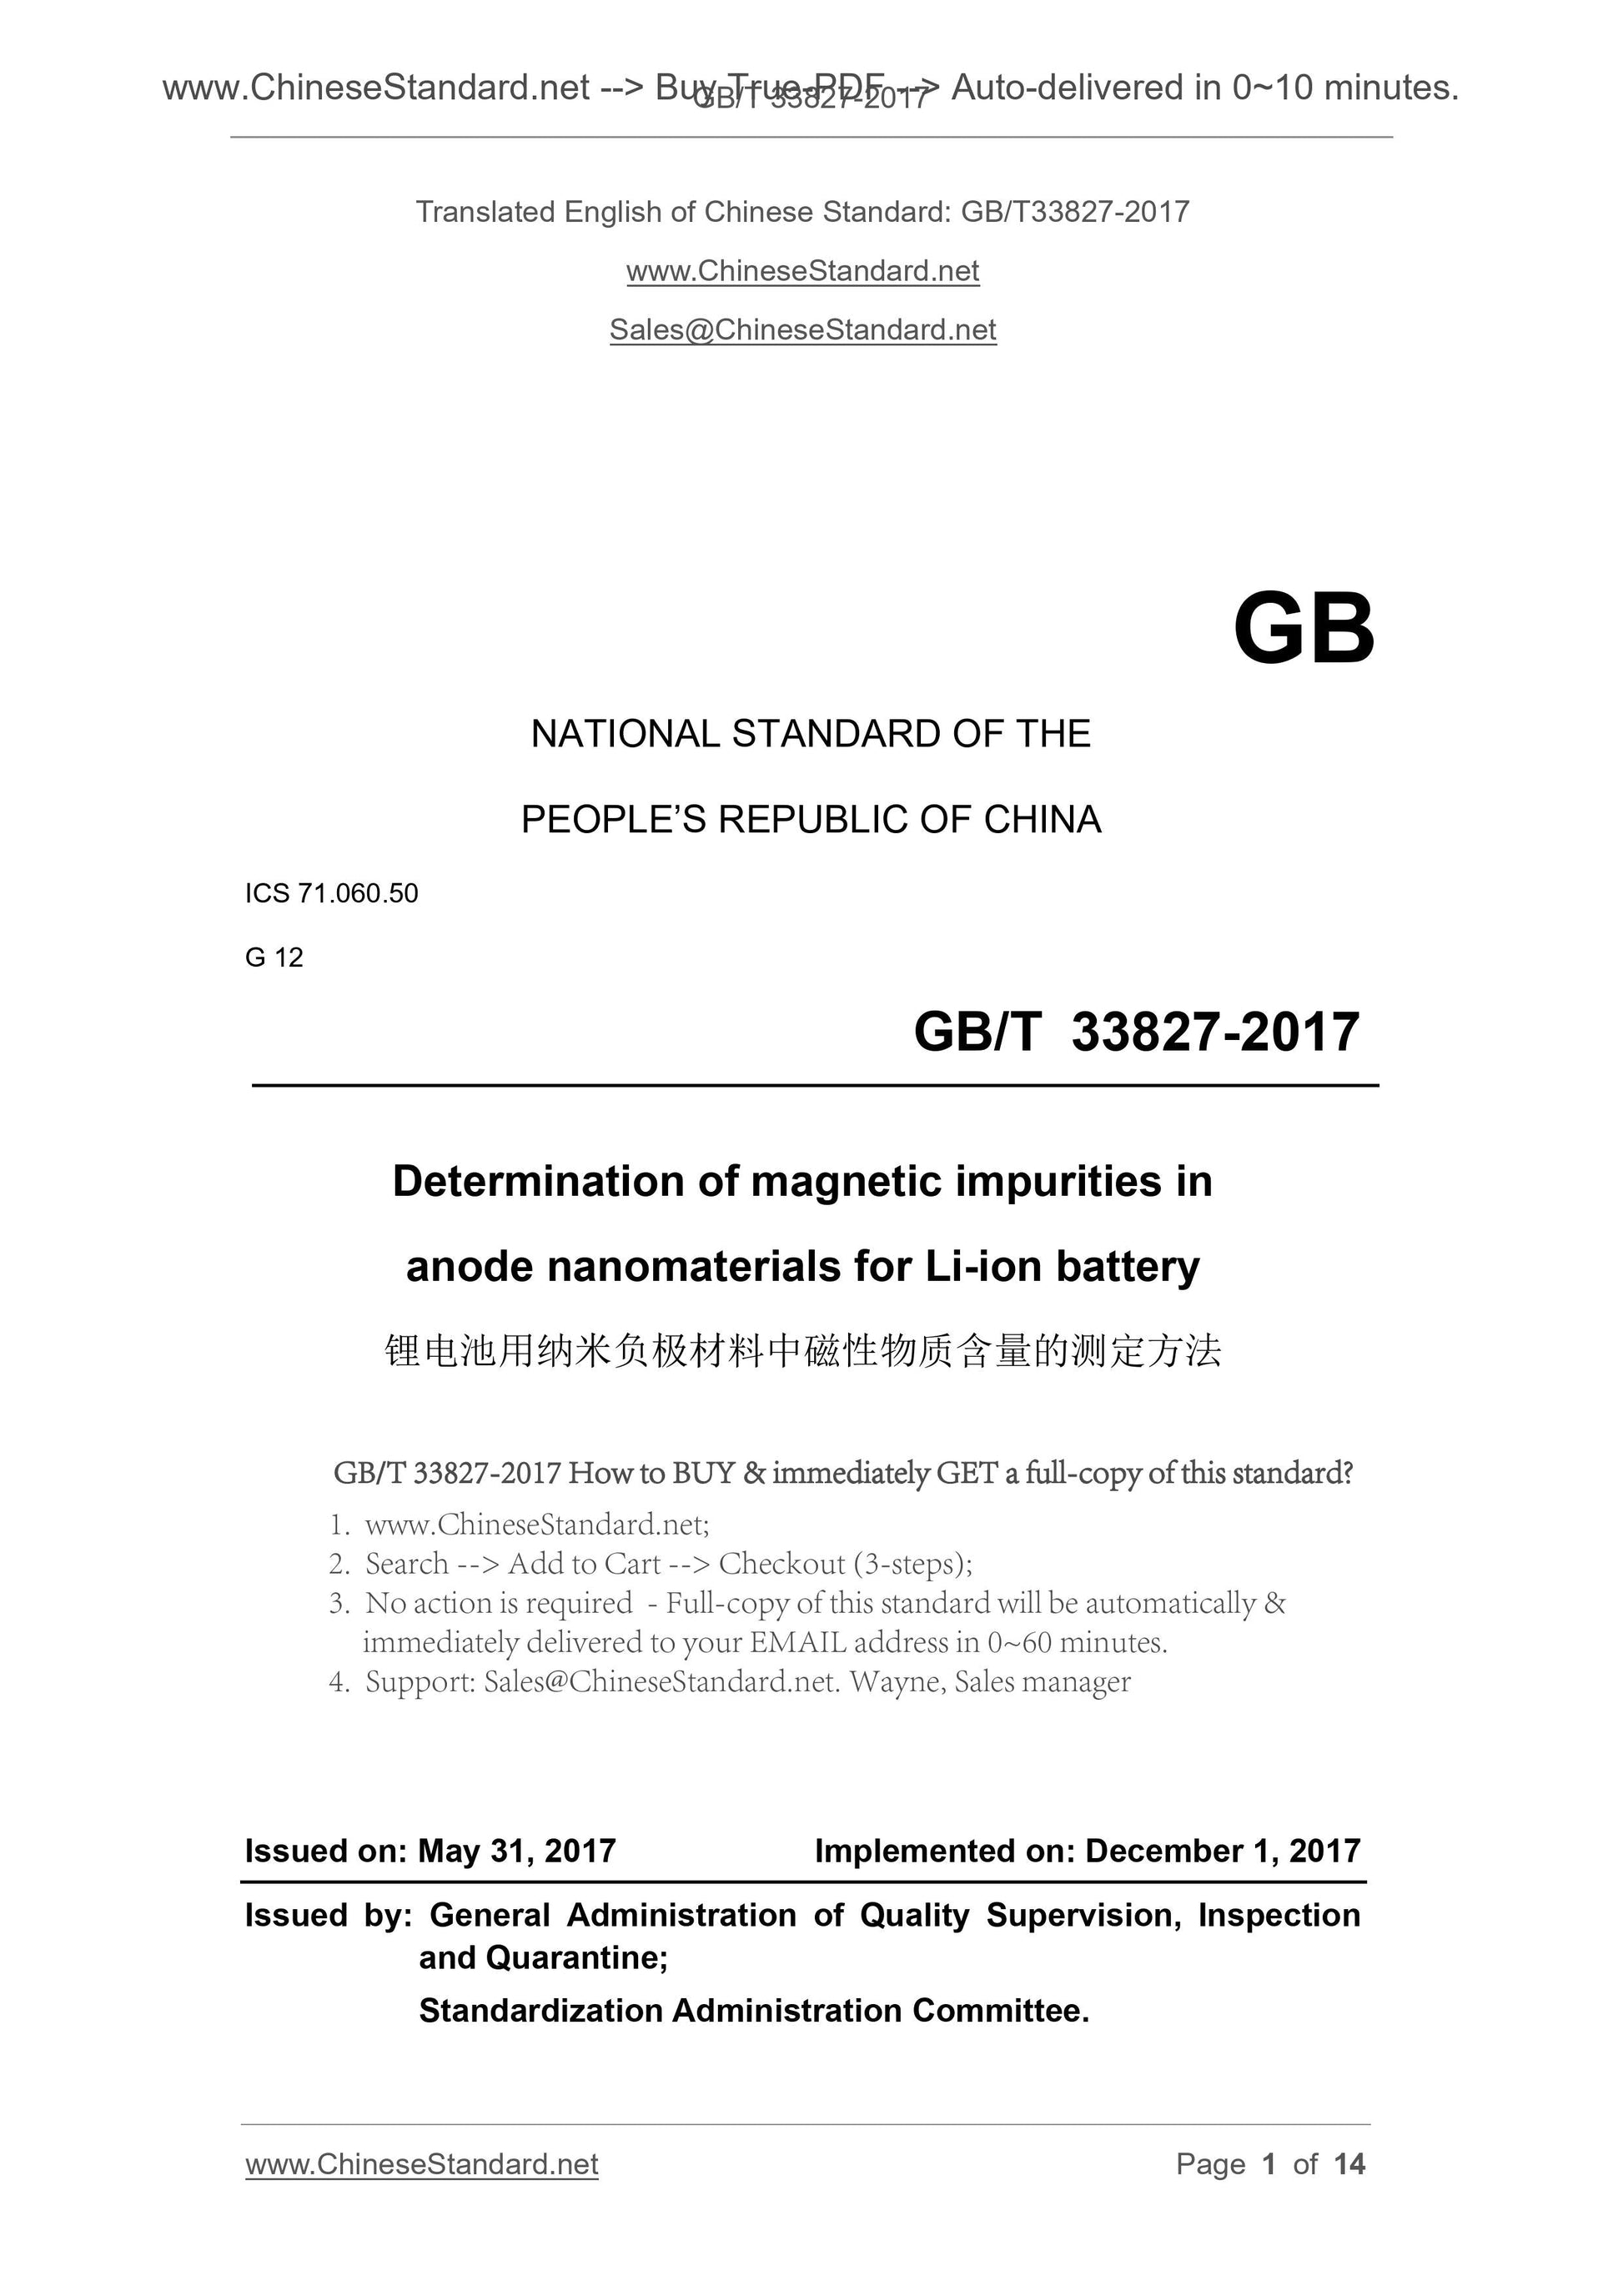 GB/T 33827-2017 Page 1